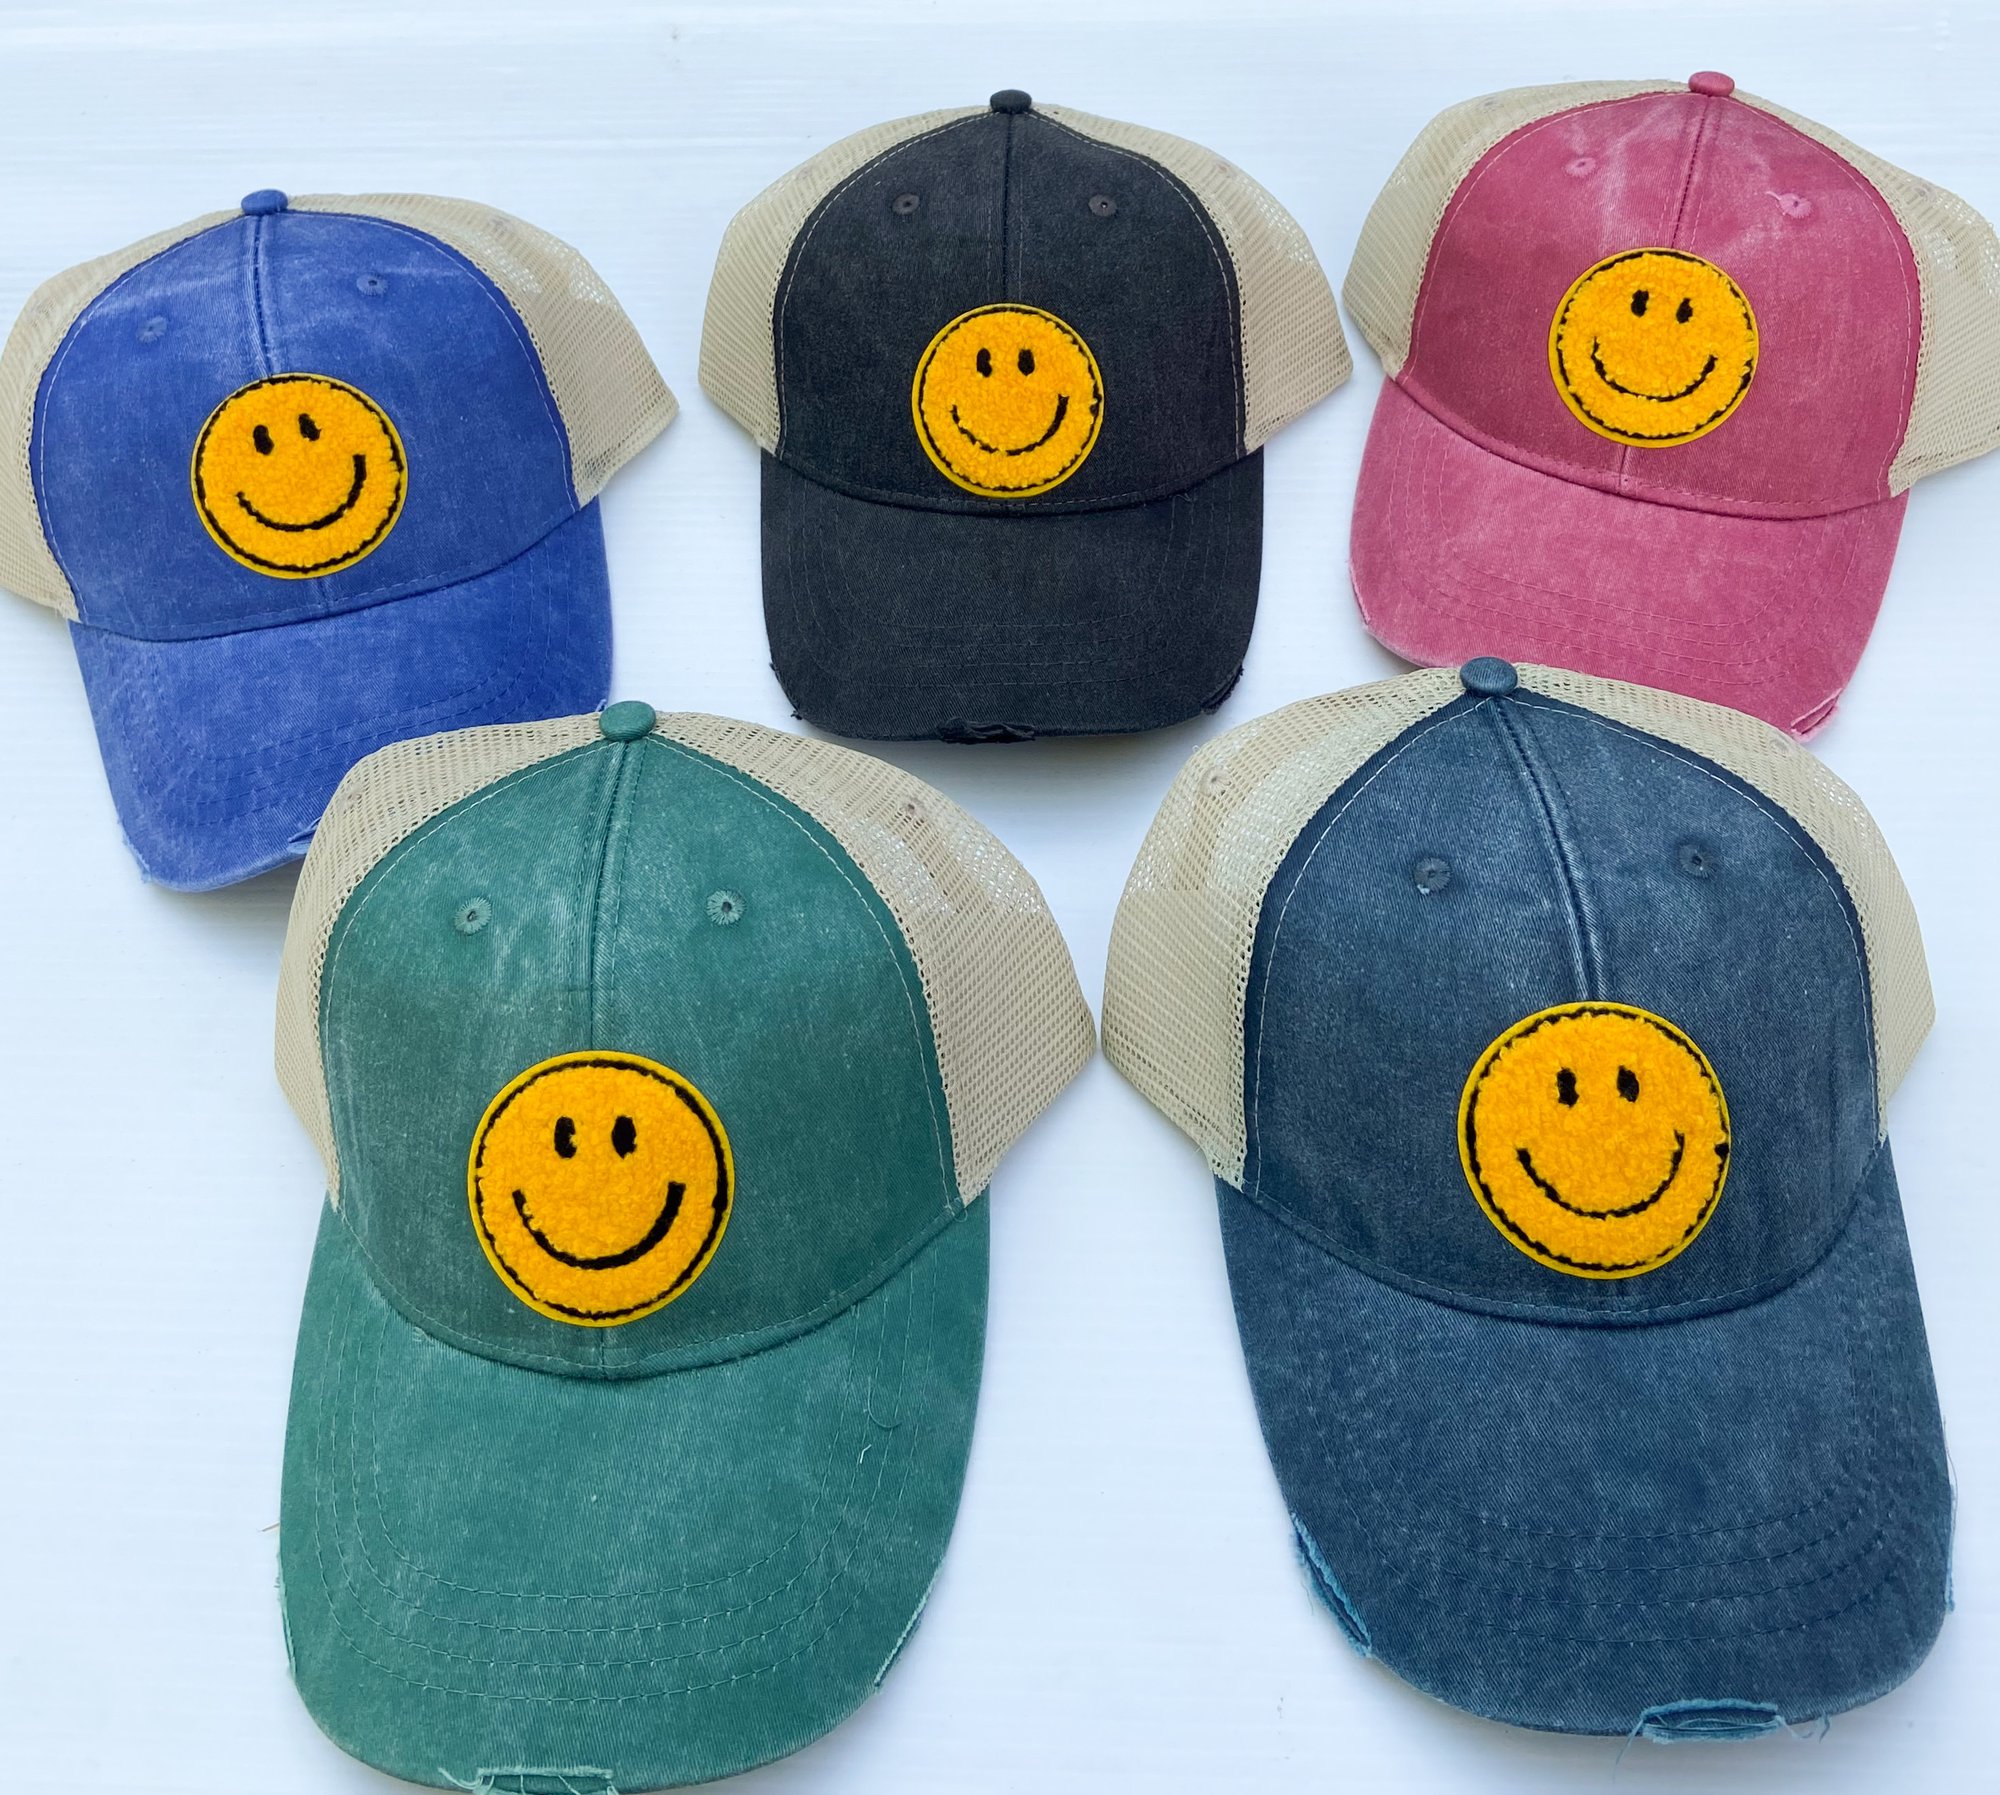 Image of Smiley face hat